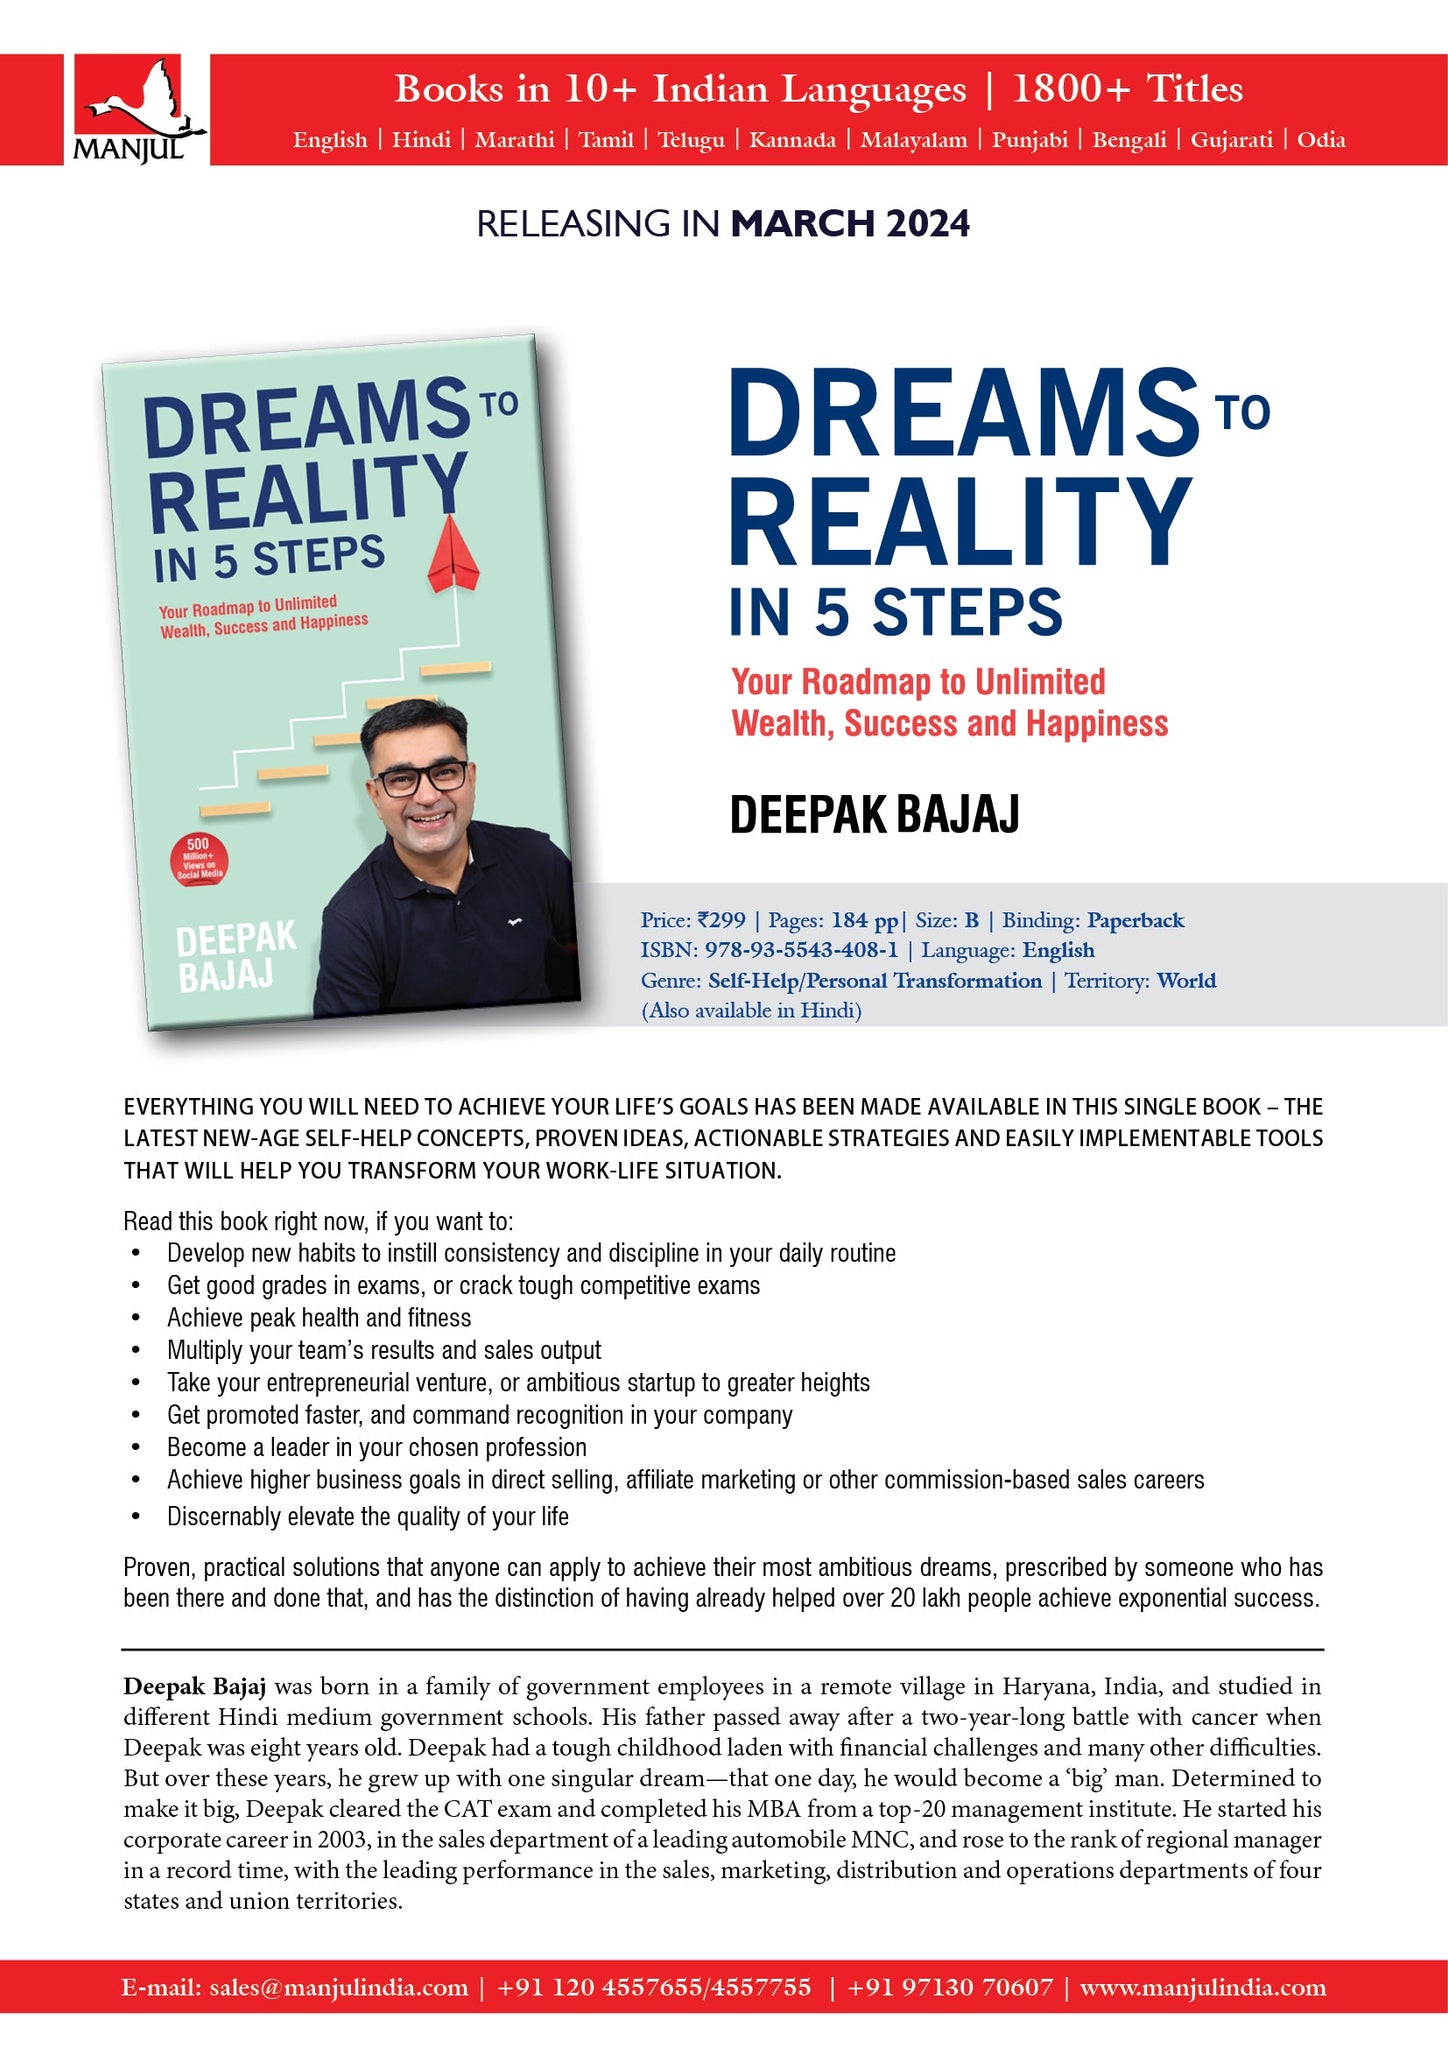 Dreams to Reality in 5 Steps